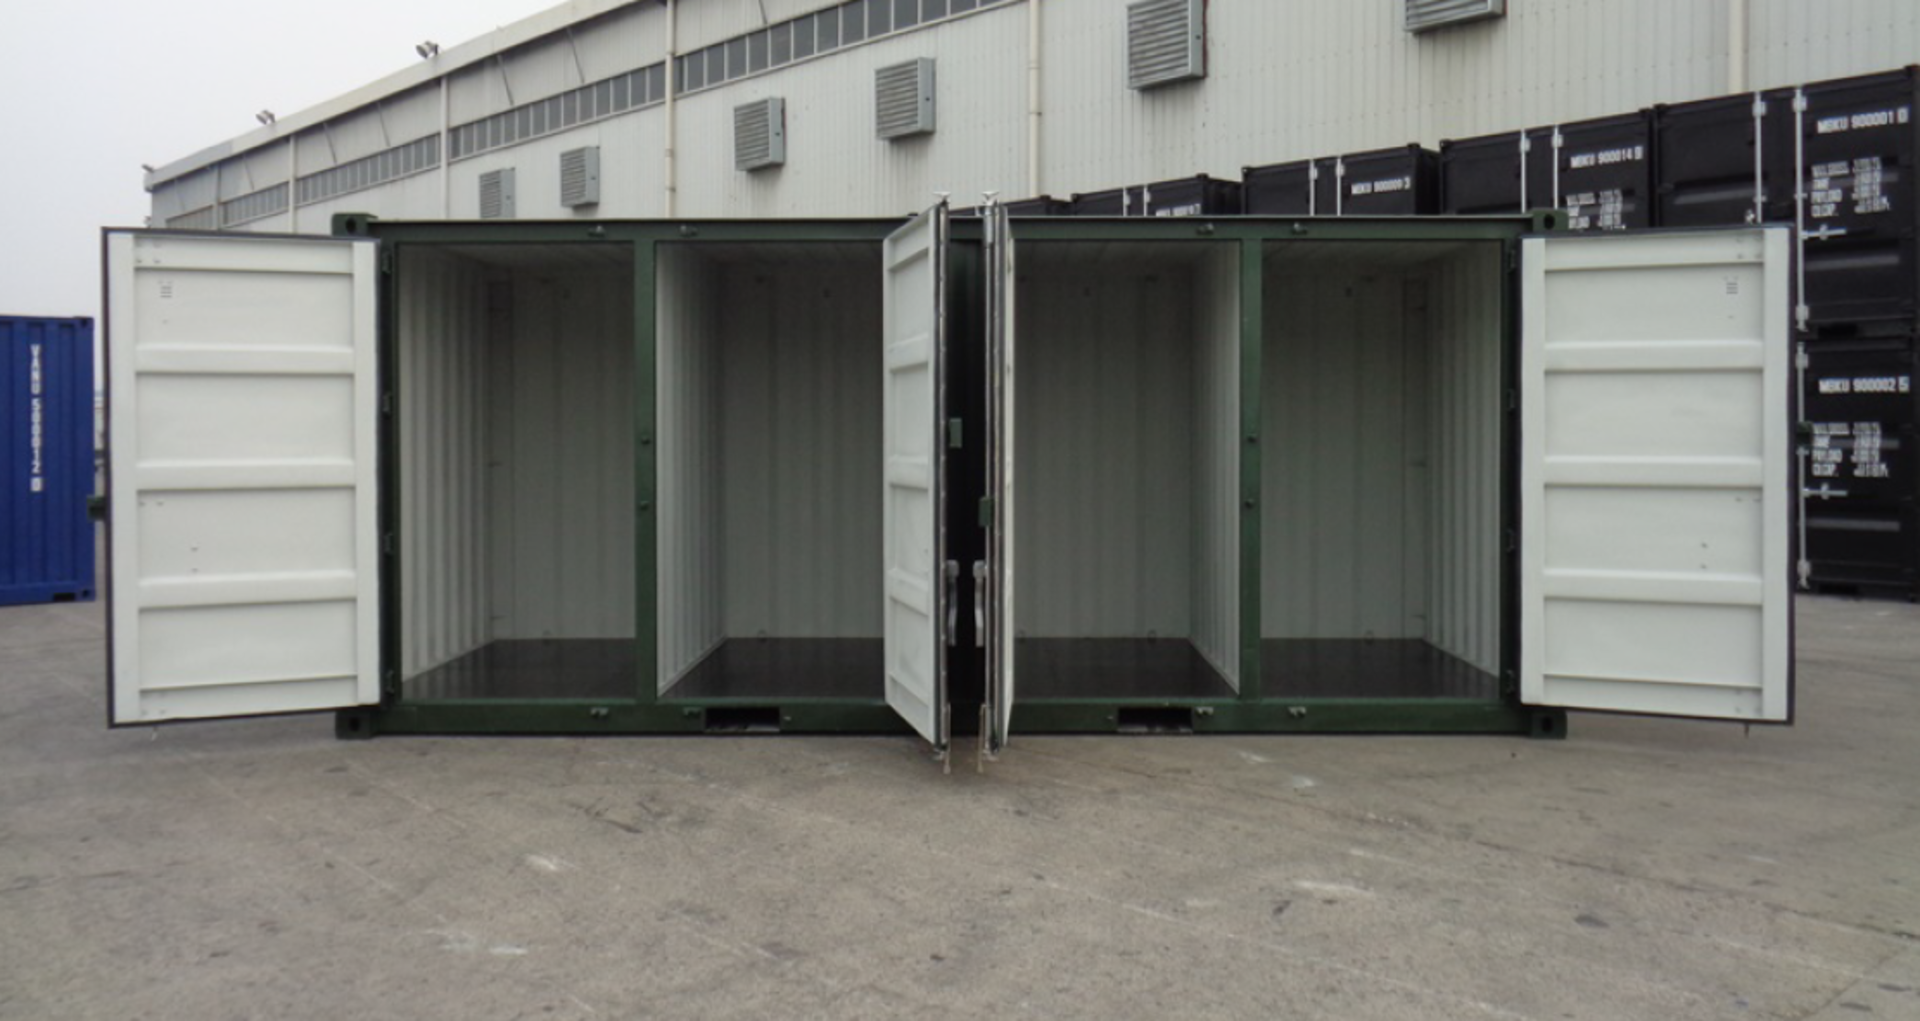 One Trip 20ft Multi Compartmentalised Shipping Container (4 rooms) - Image 4 of 7